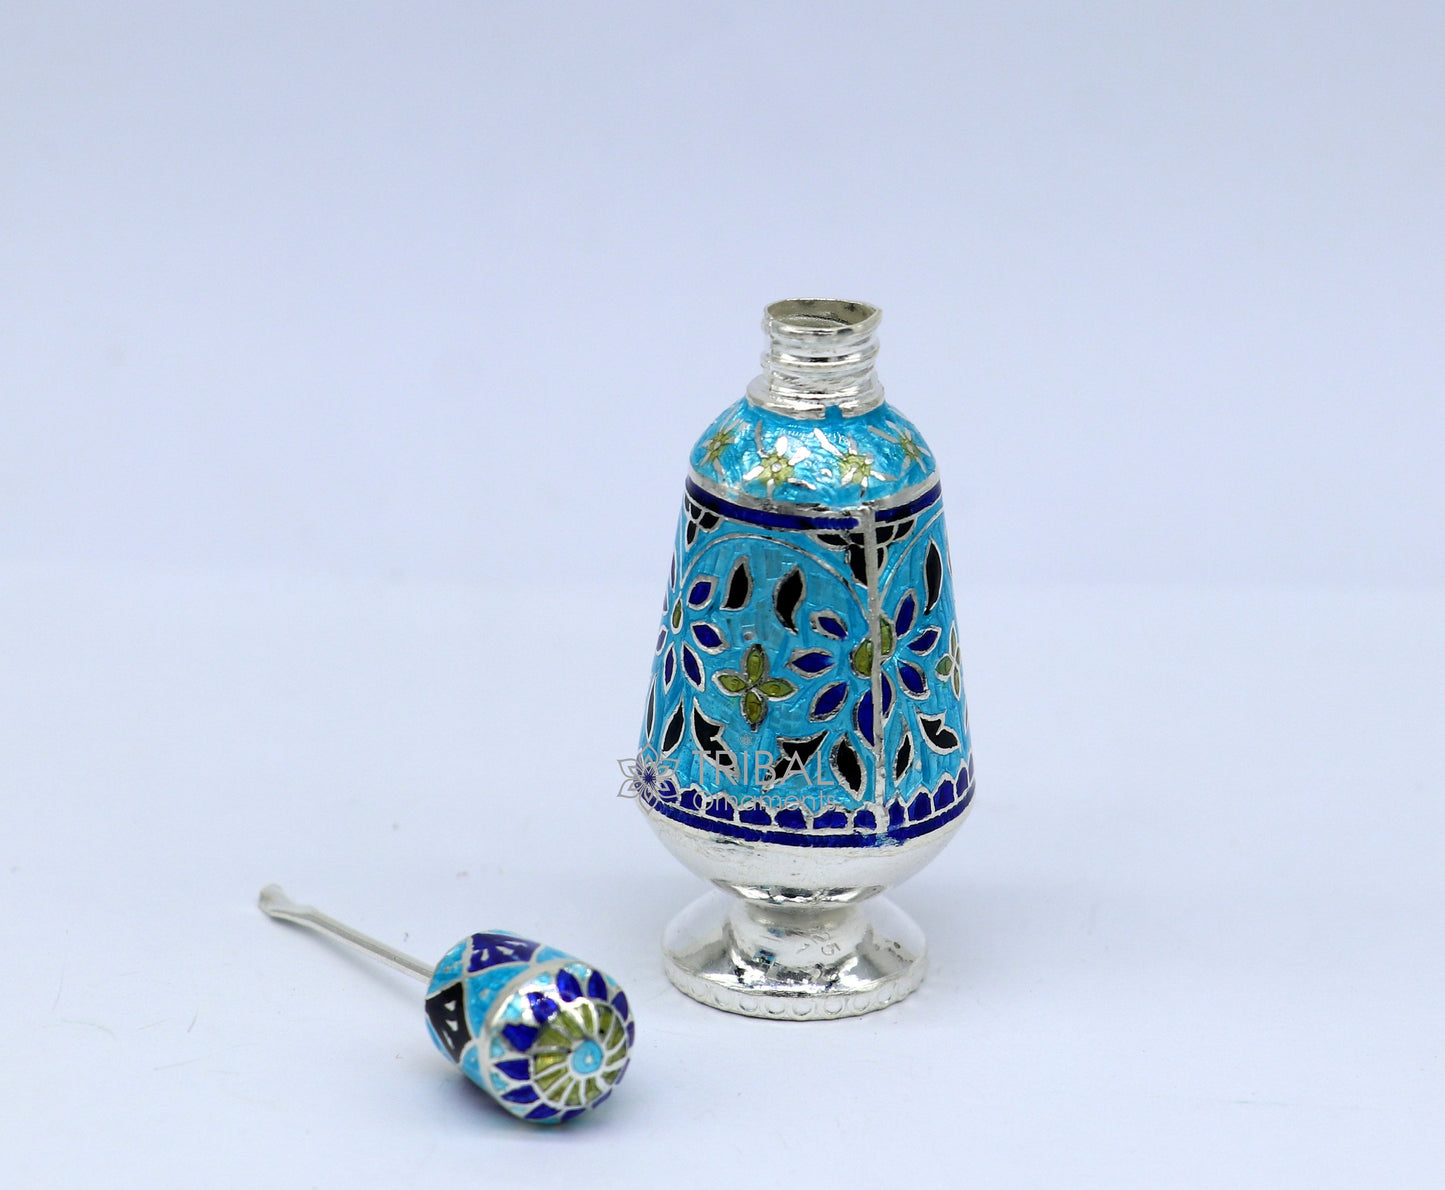 Enamel work 925 Sterling silver handmade fabulous trinket box, gorgeous container box, casket box, sindoor box brides gifting box stb791 - TRIBAL ORNAMENTS